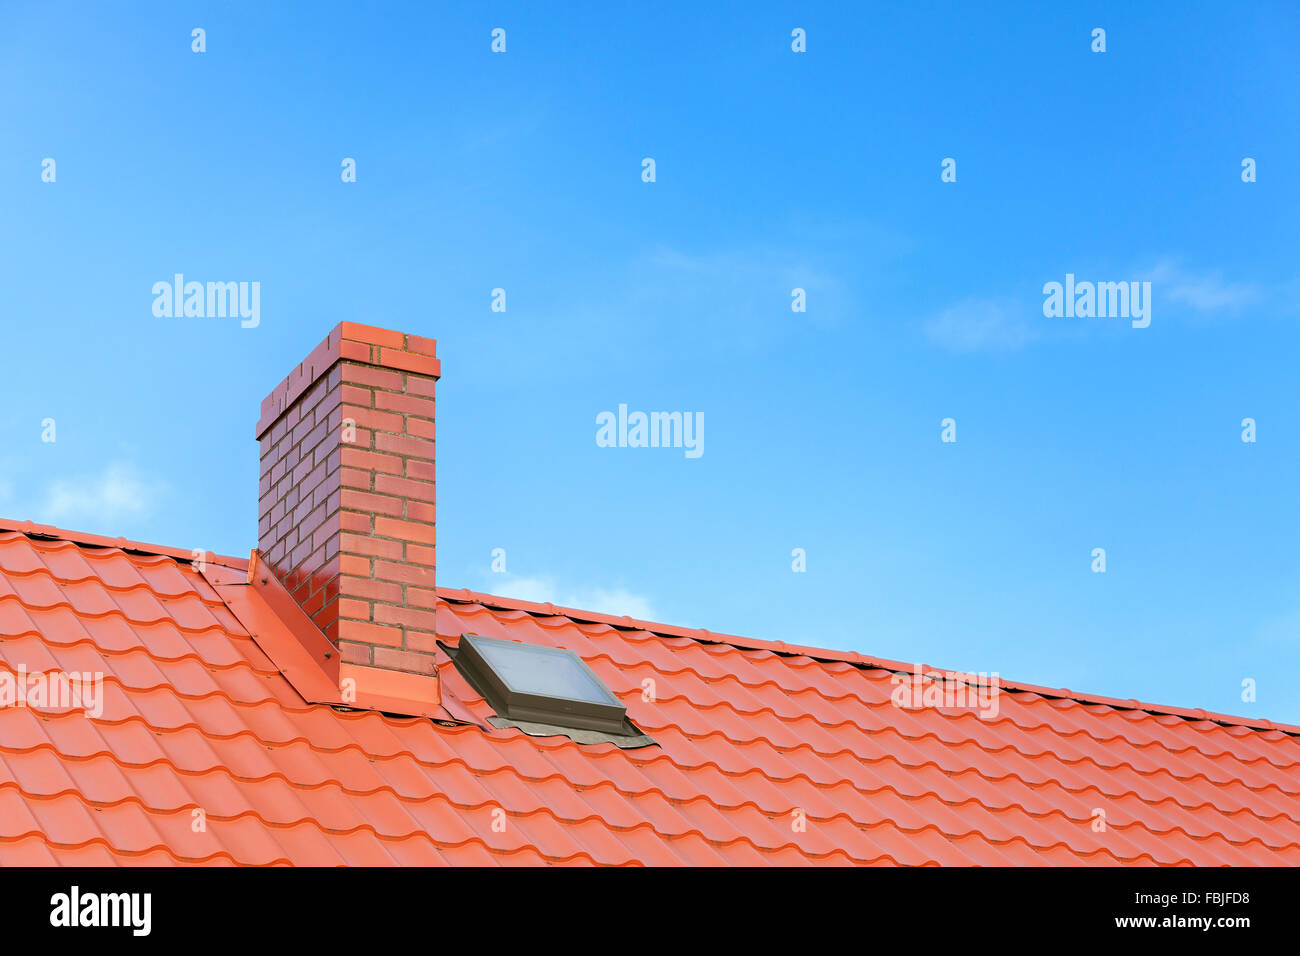 Roof with ceramic tile chimney against blue sky, space for text. Stock Photo